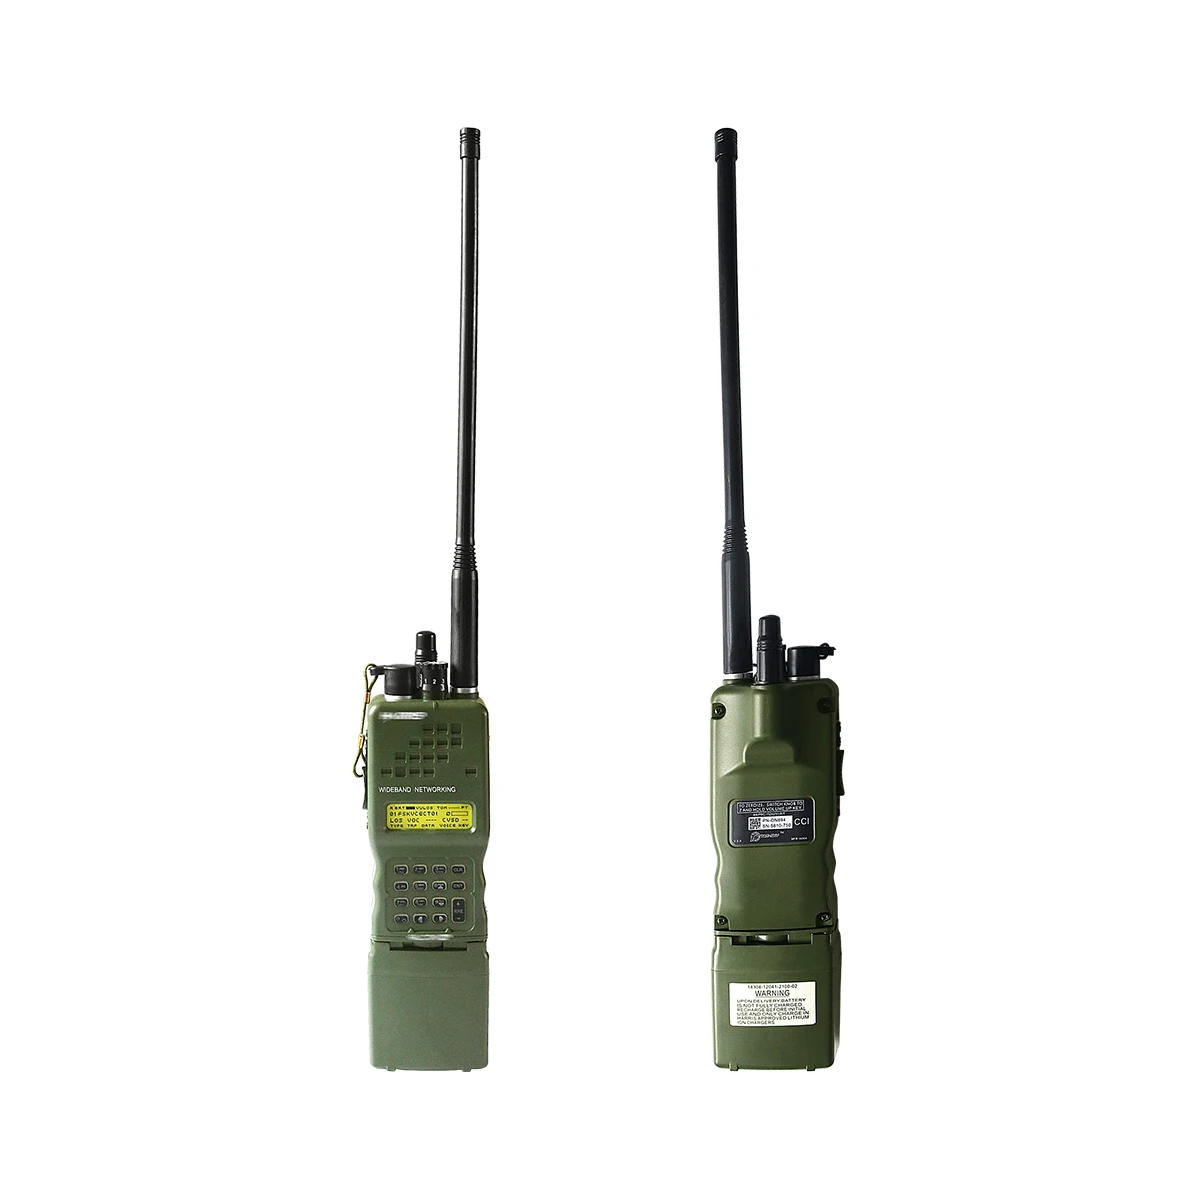 military-tactical-headset-walkie-talkie-simulation-model-harris-an-prc152-152a-virtual-case-dummy-case